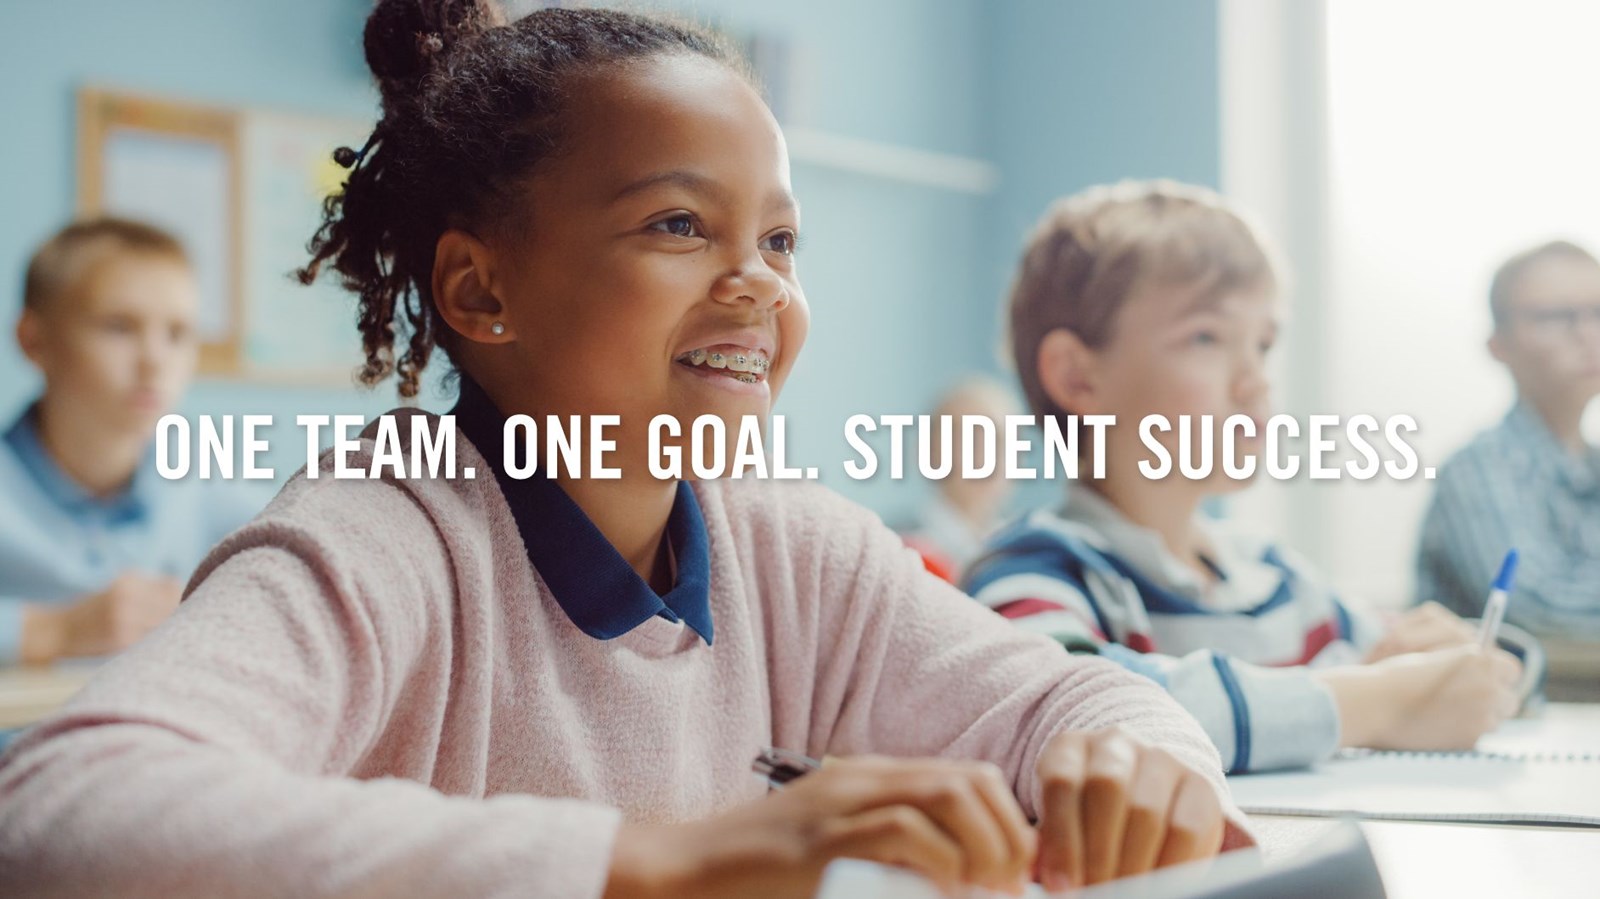 One Team One Goal Student Success - Smiling Kids in Classroom